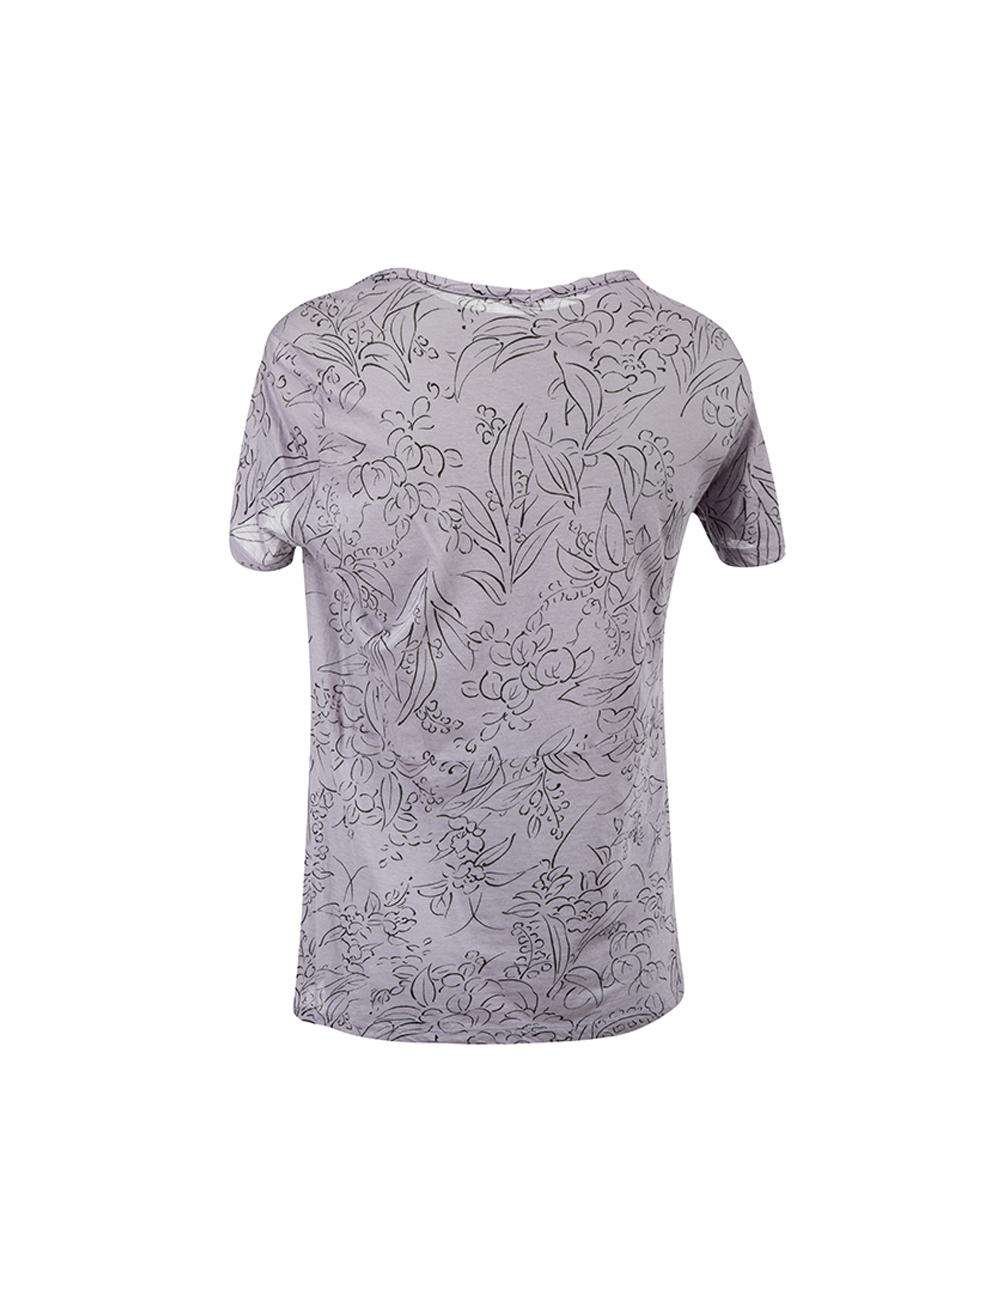 Marni Women's Purple Printed Short Sleeve T-Shirt In Good Condition For Sale In London, GB